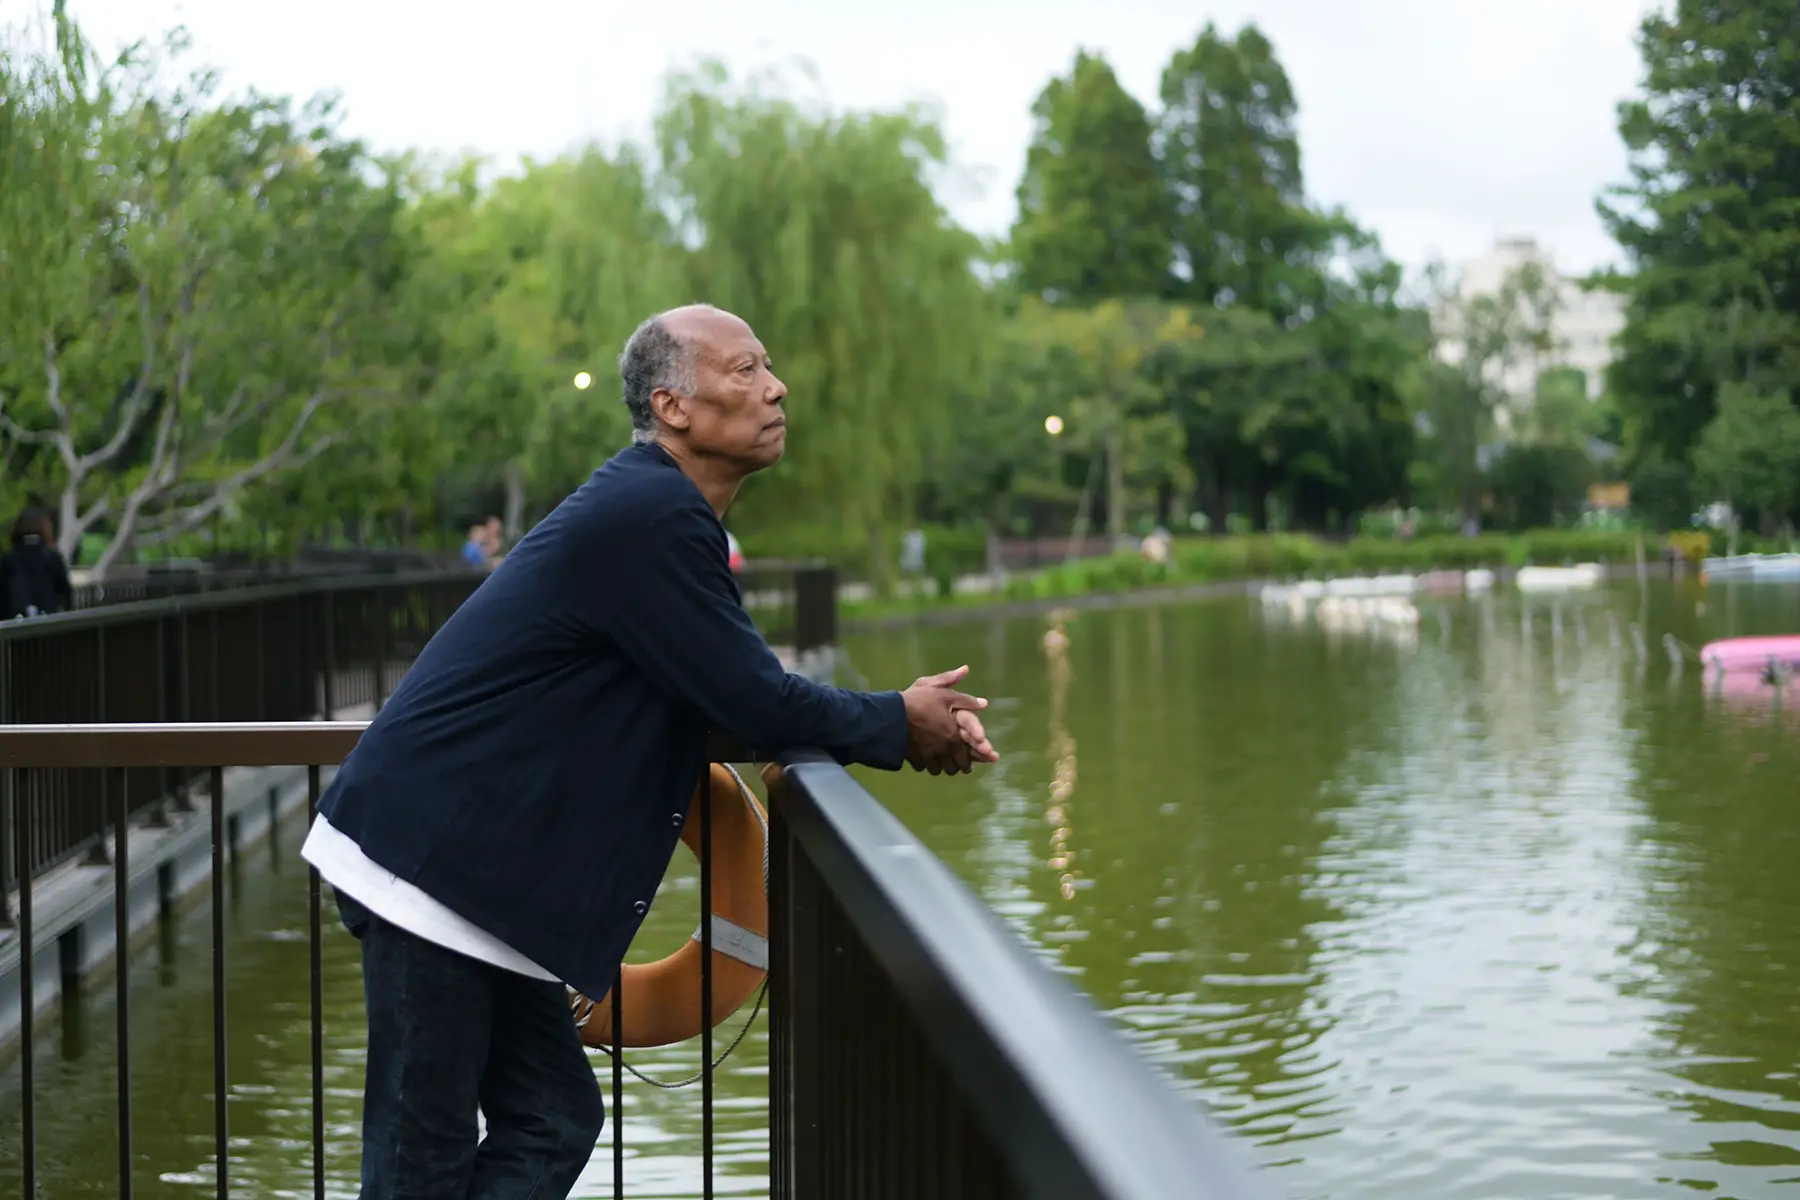 A senior man leaning on railings, looking at a lake.